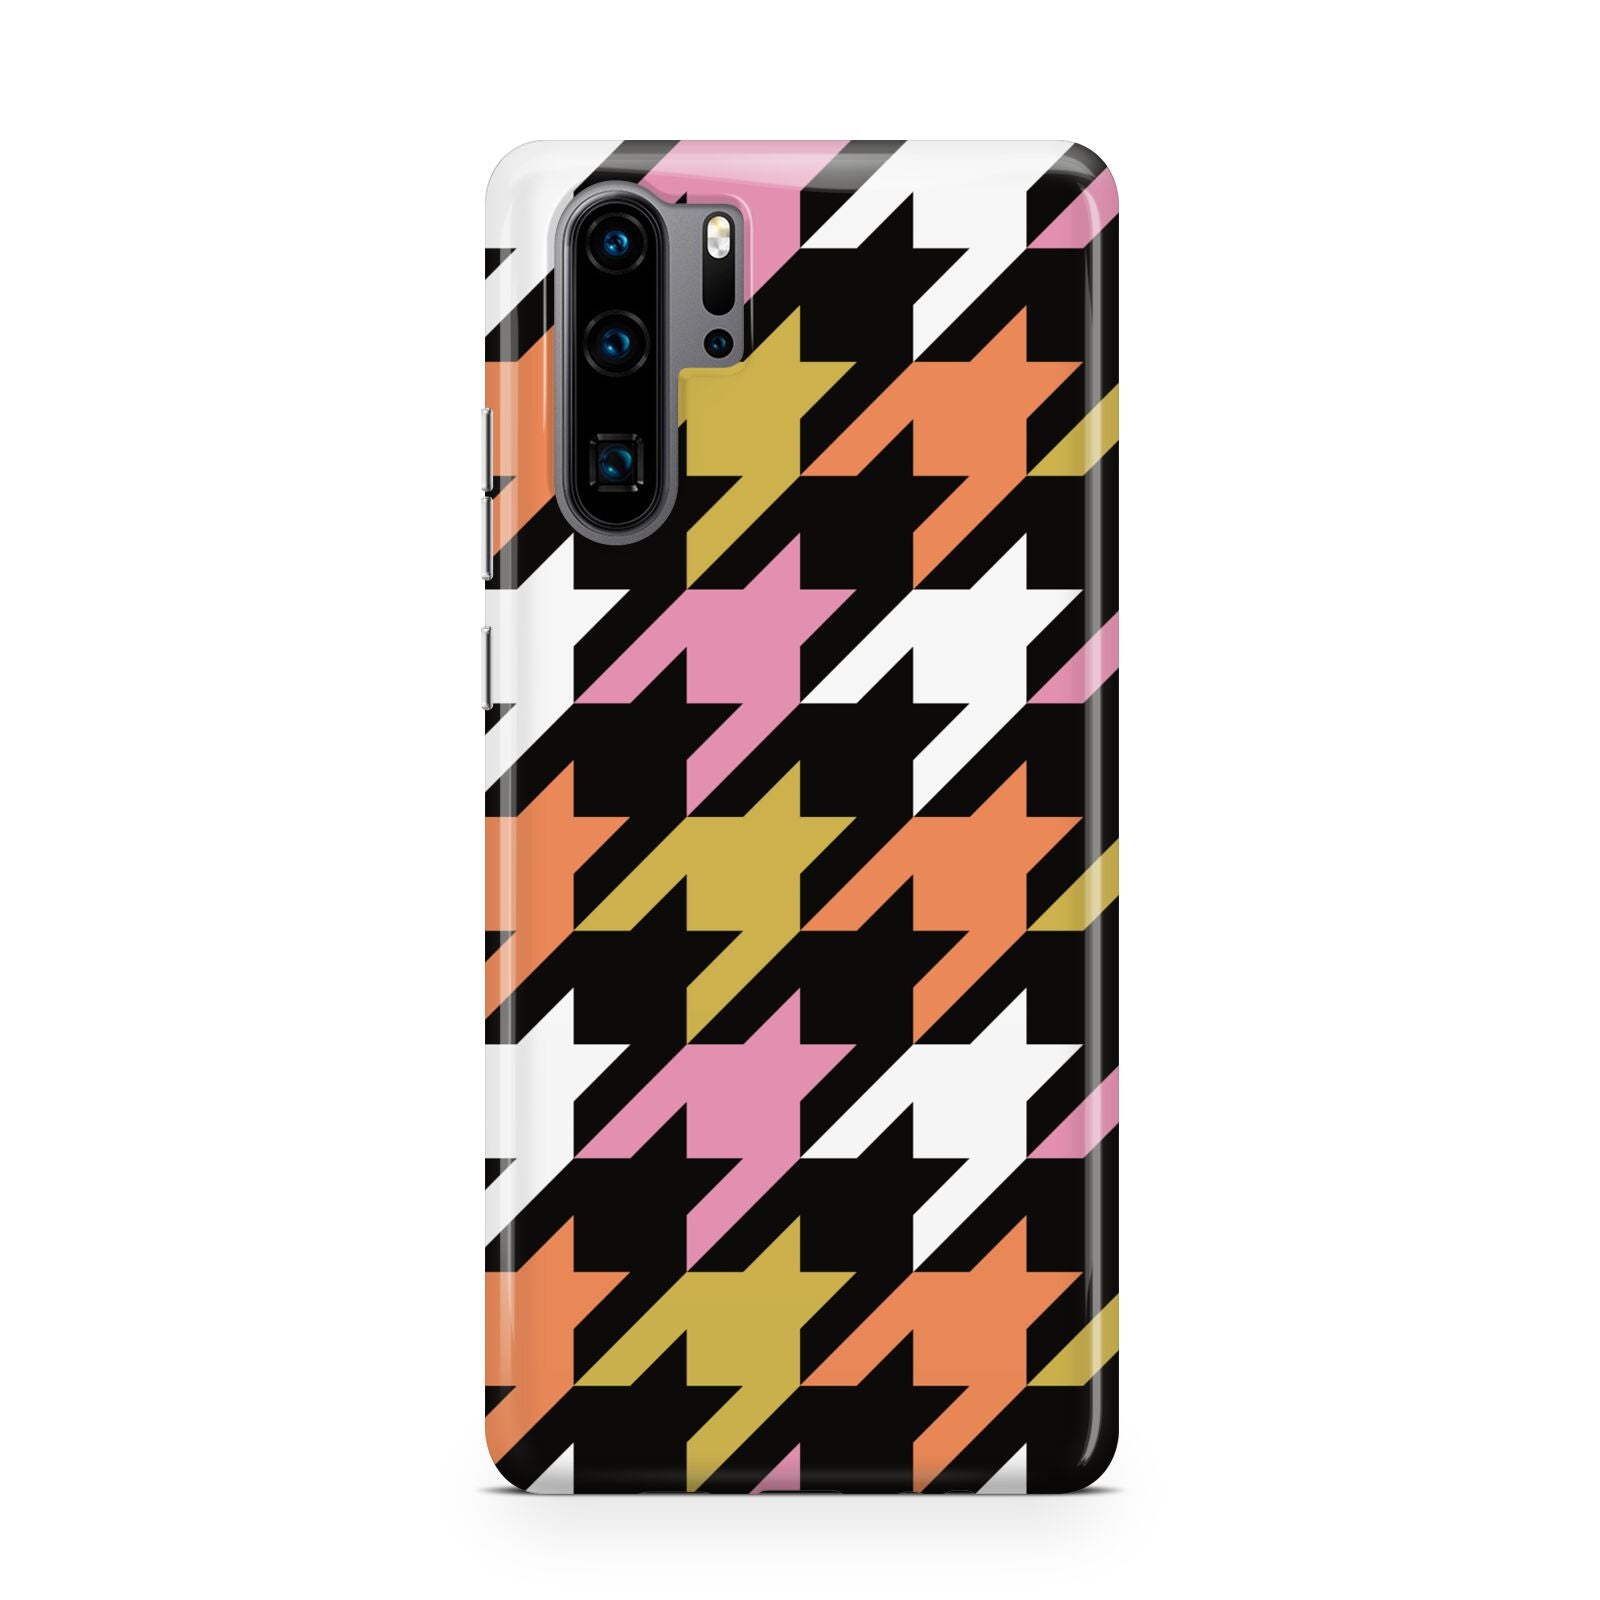 Retro Houndstooth Huawei P30 Pro Phone Case